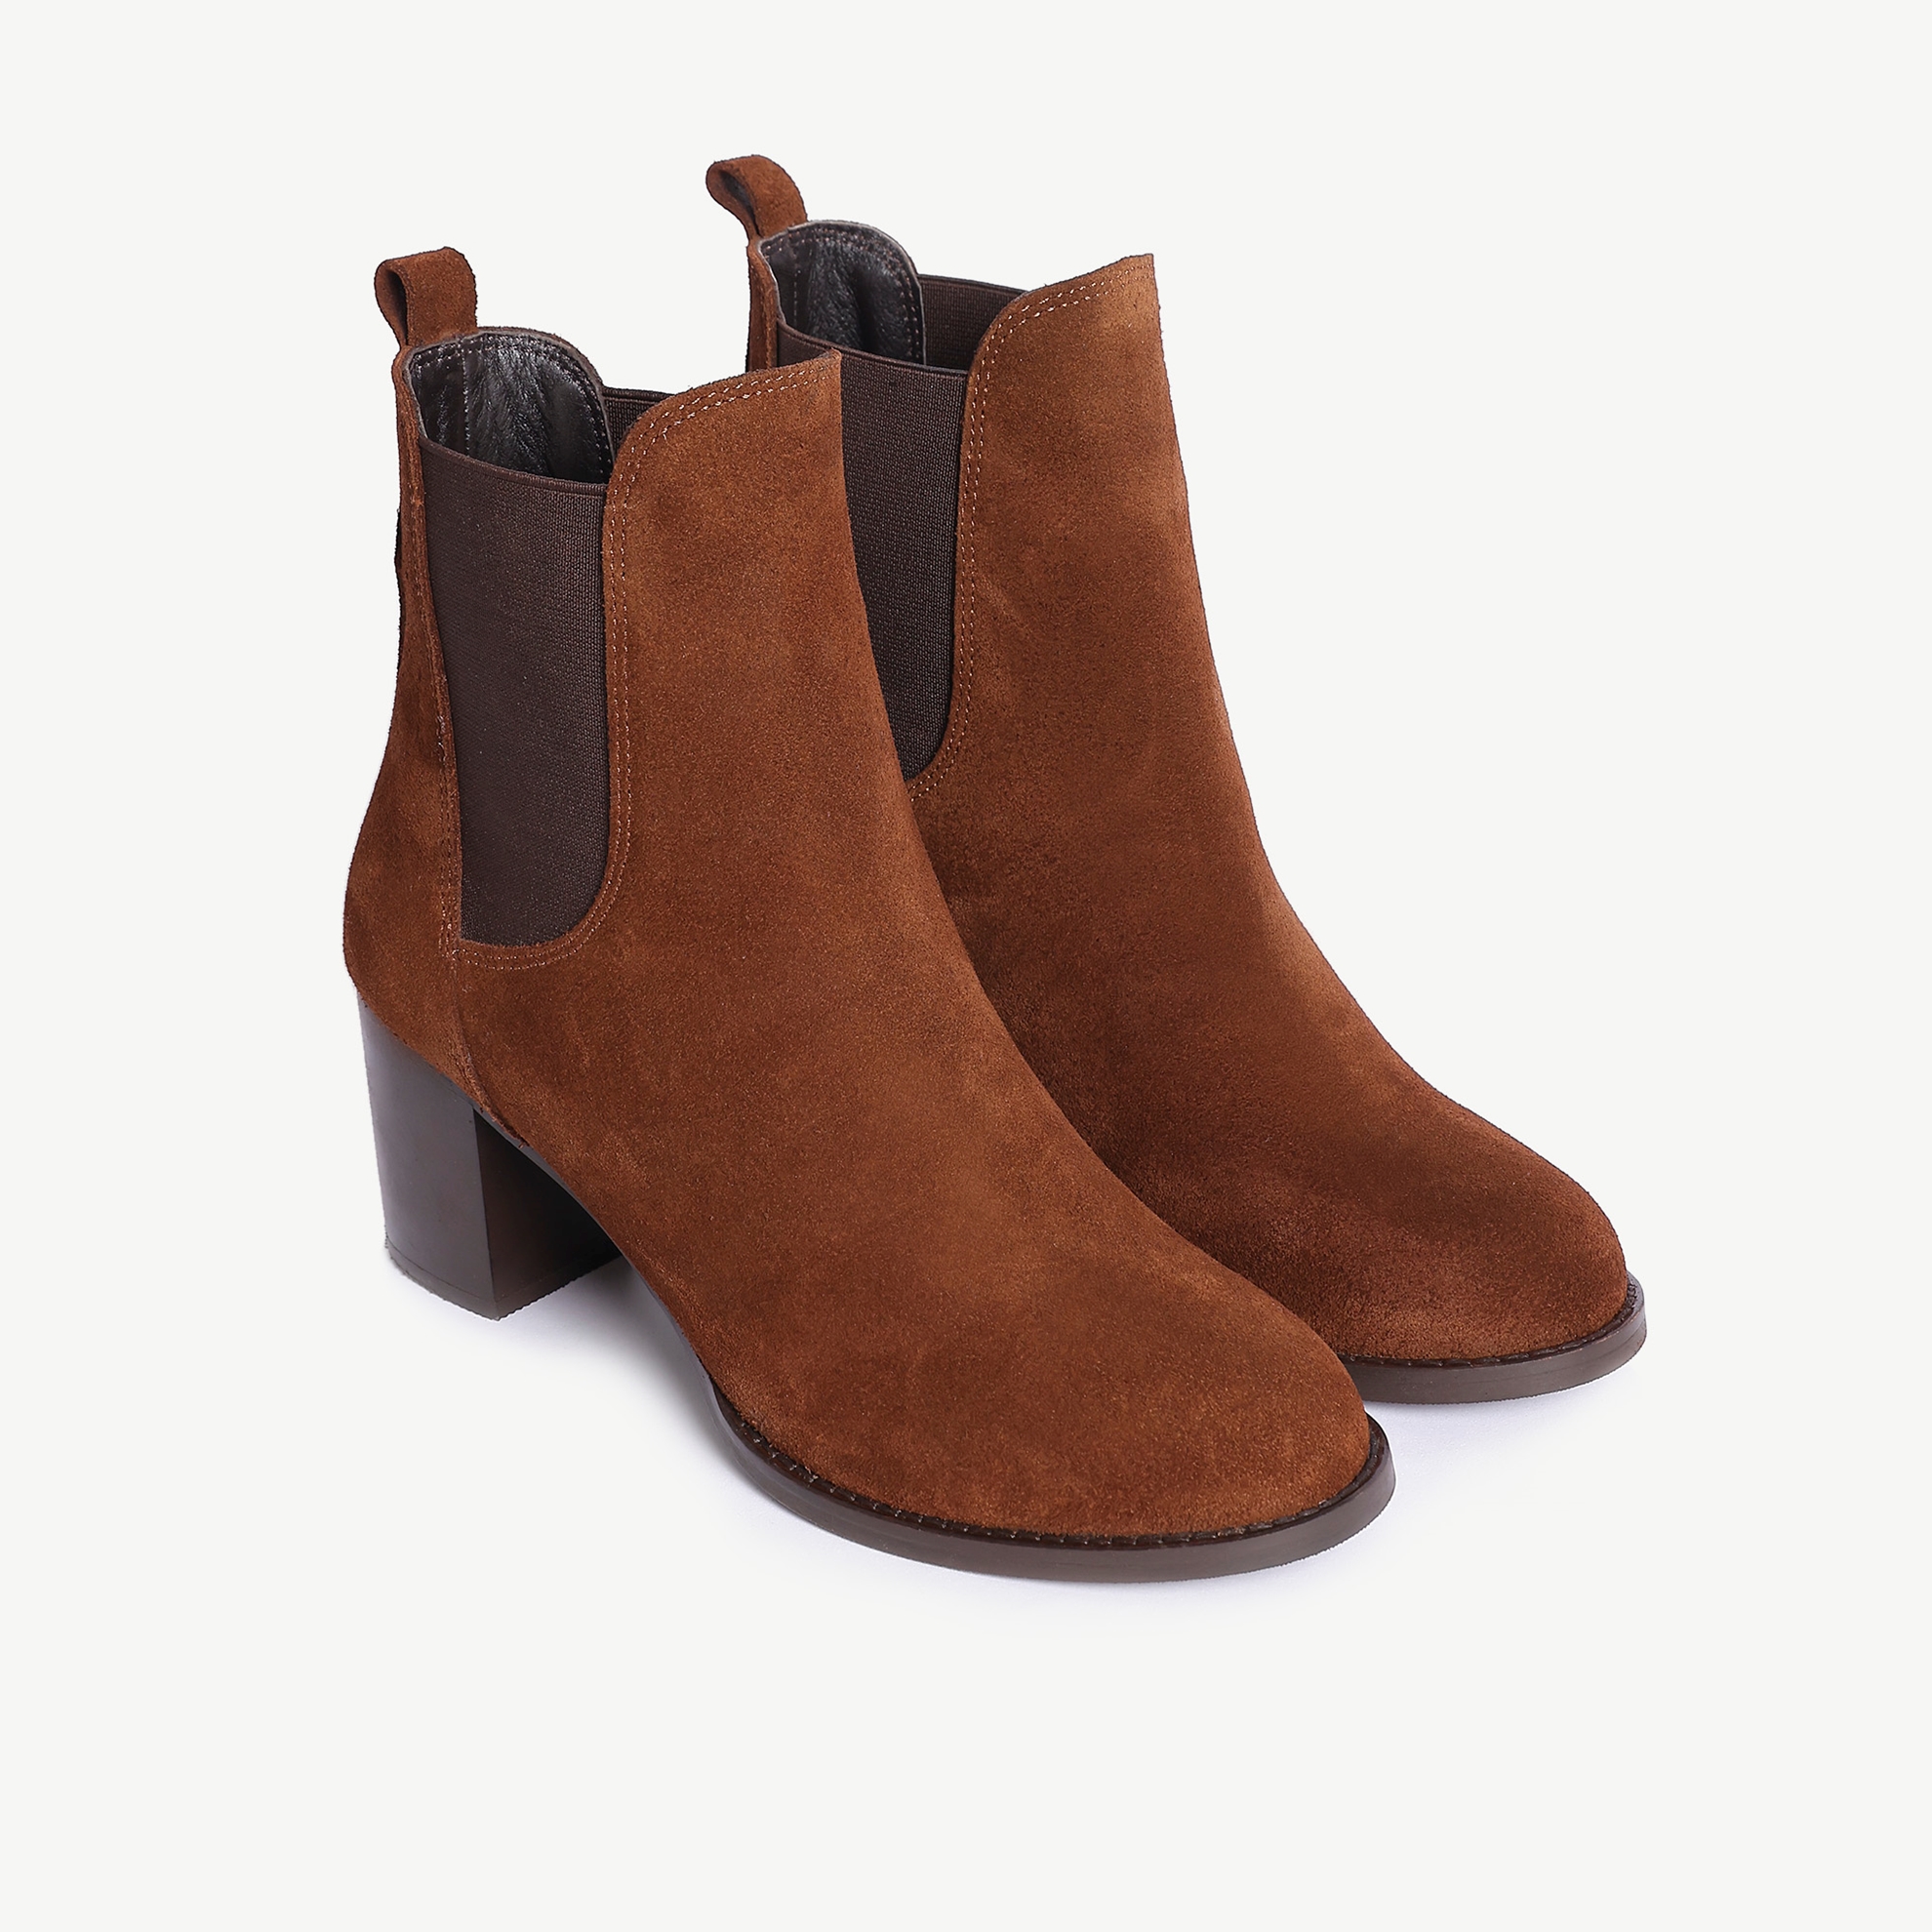 HigH-Heeled Suede Boots